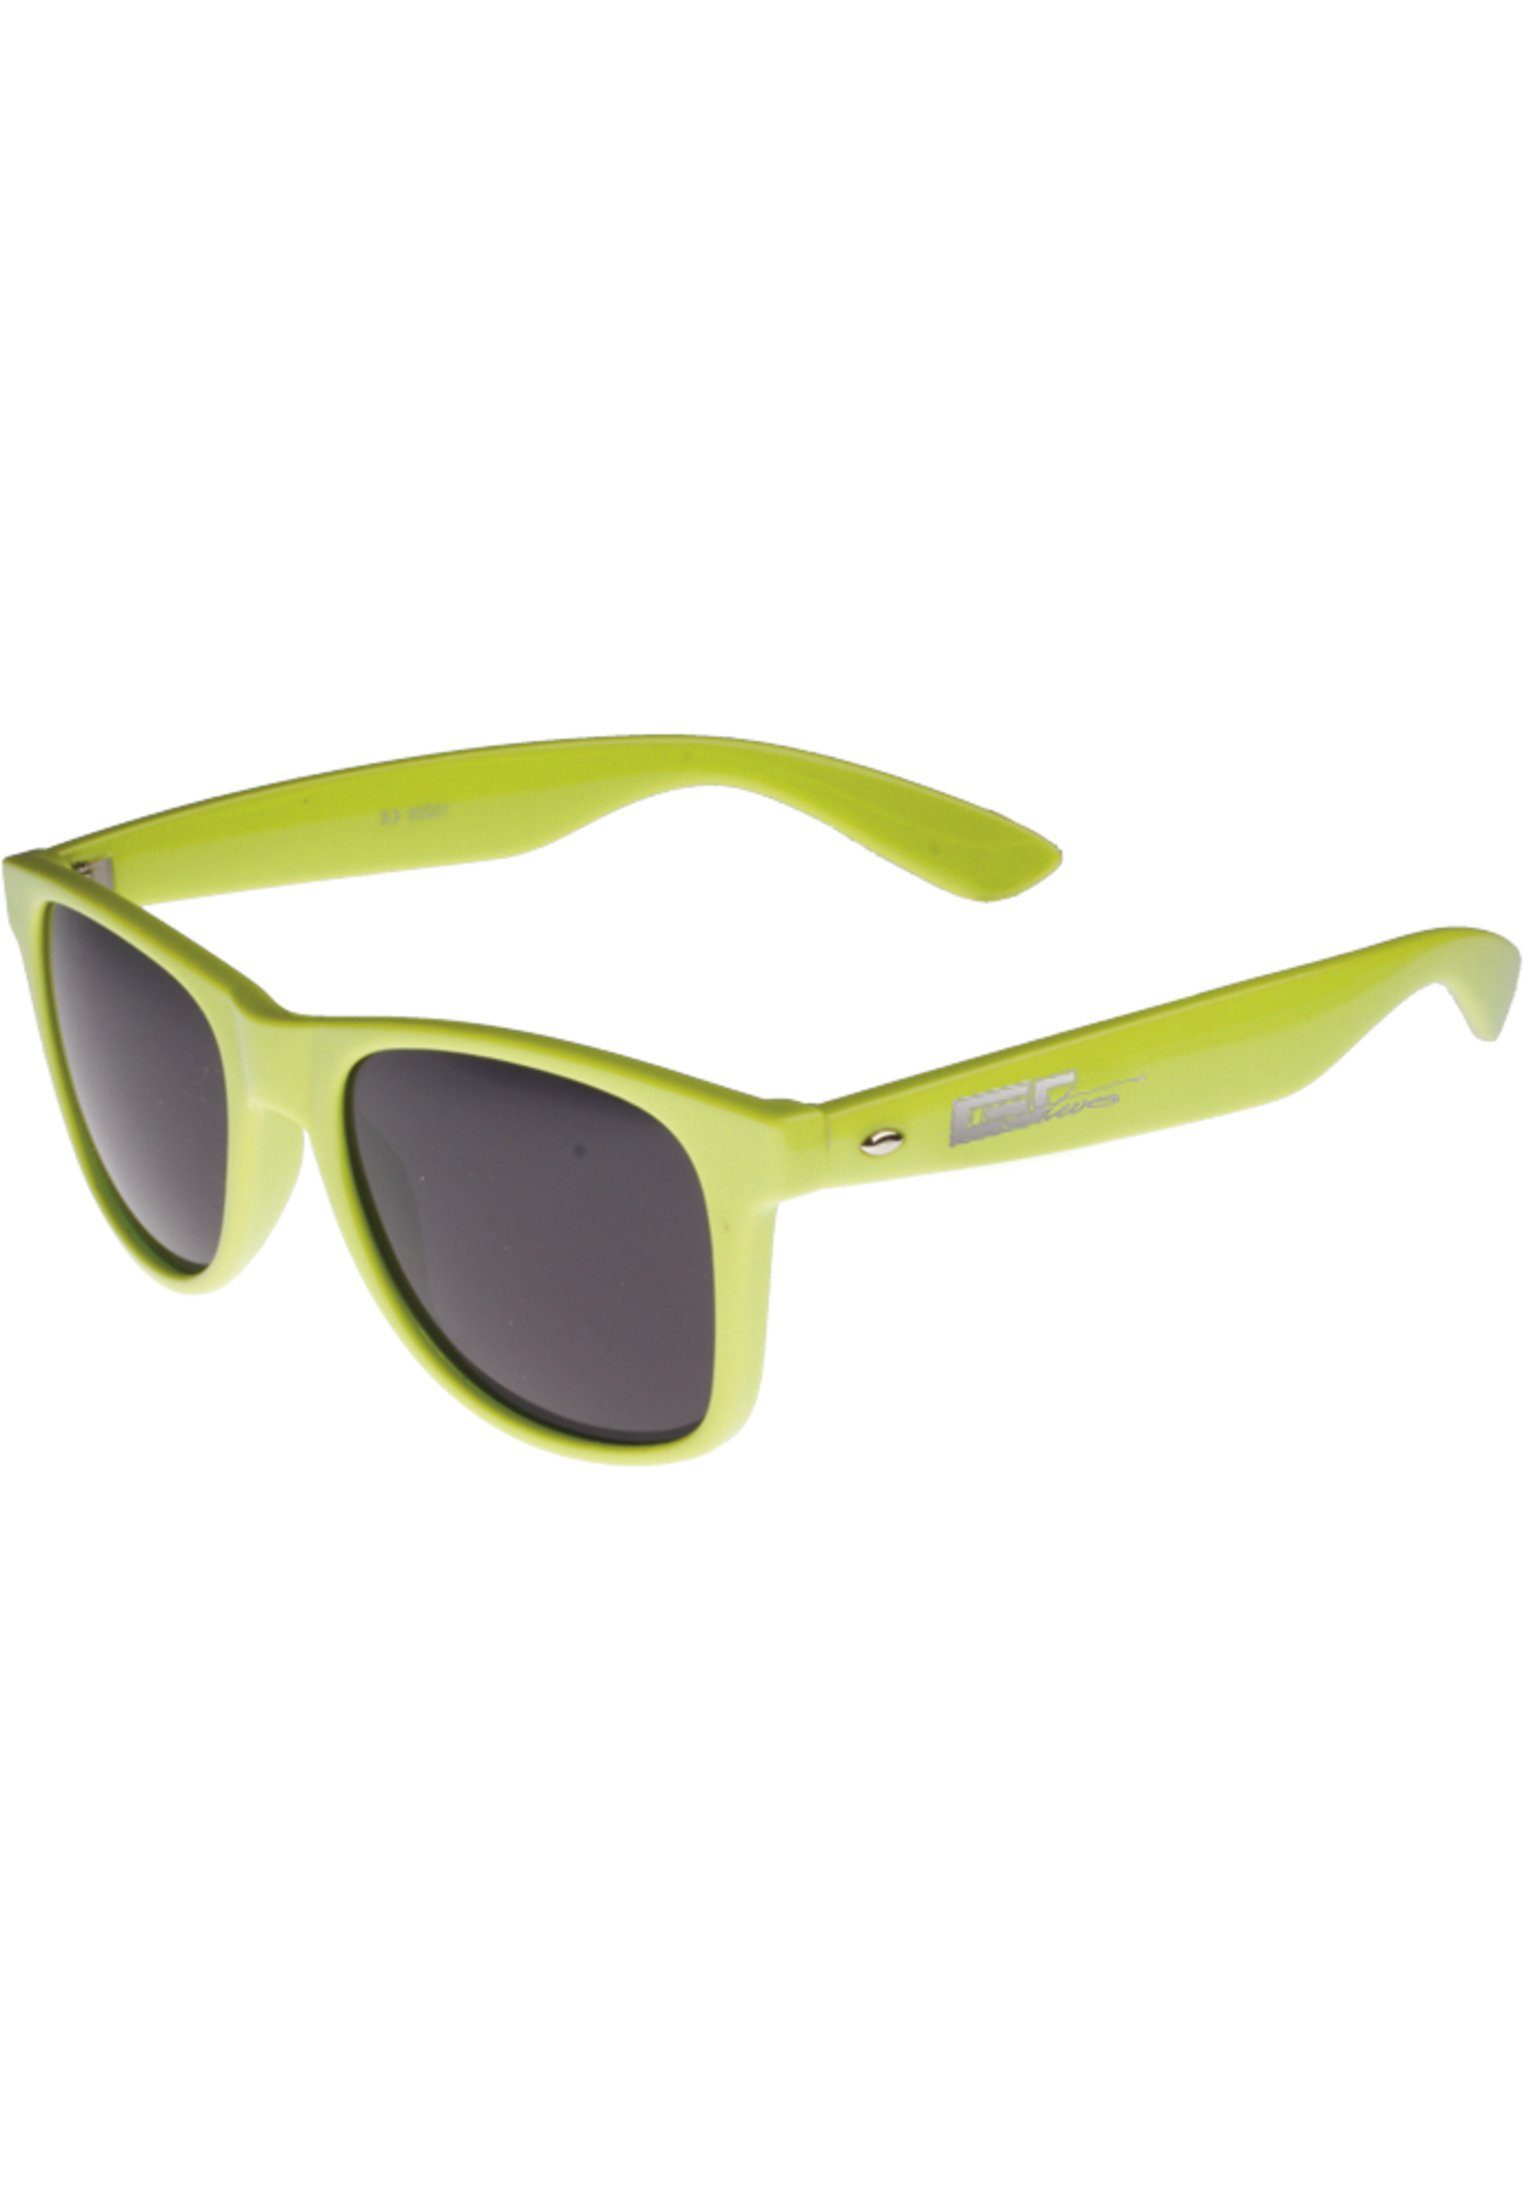 Accessoires Shades MSTRDS neongreen Groove GStwo Sonnenbrille